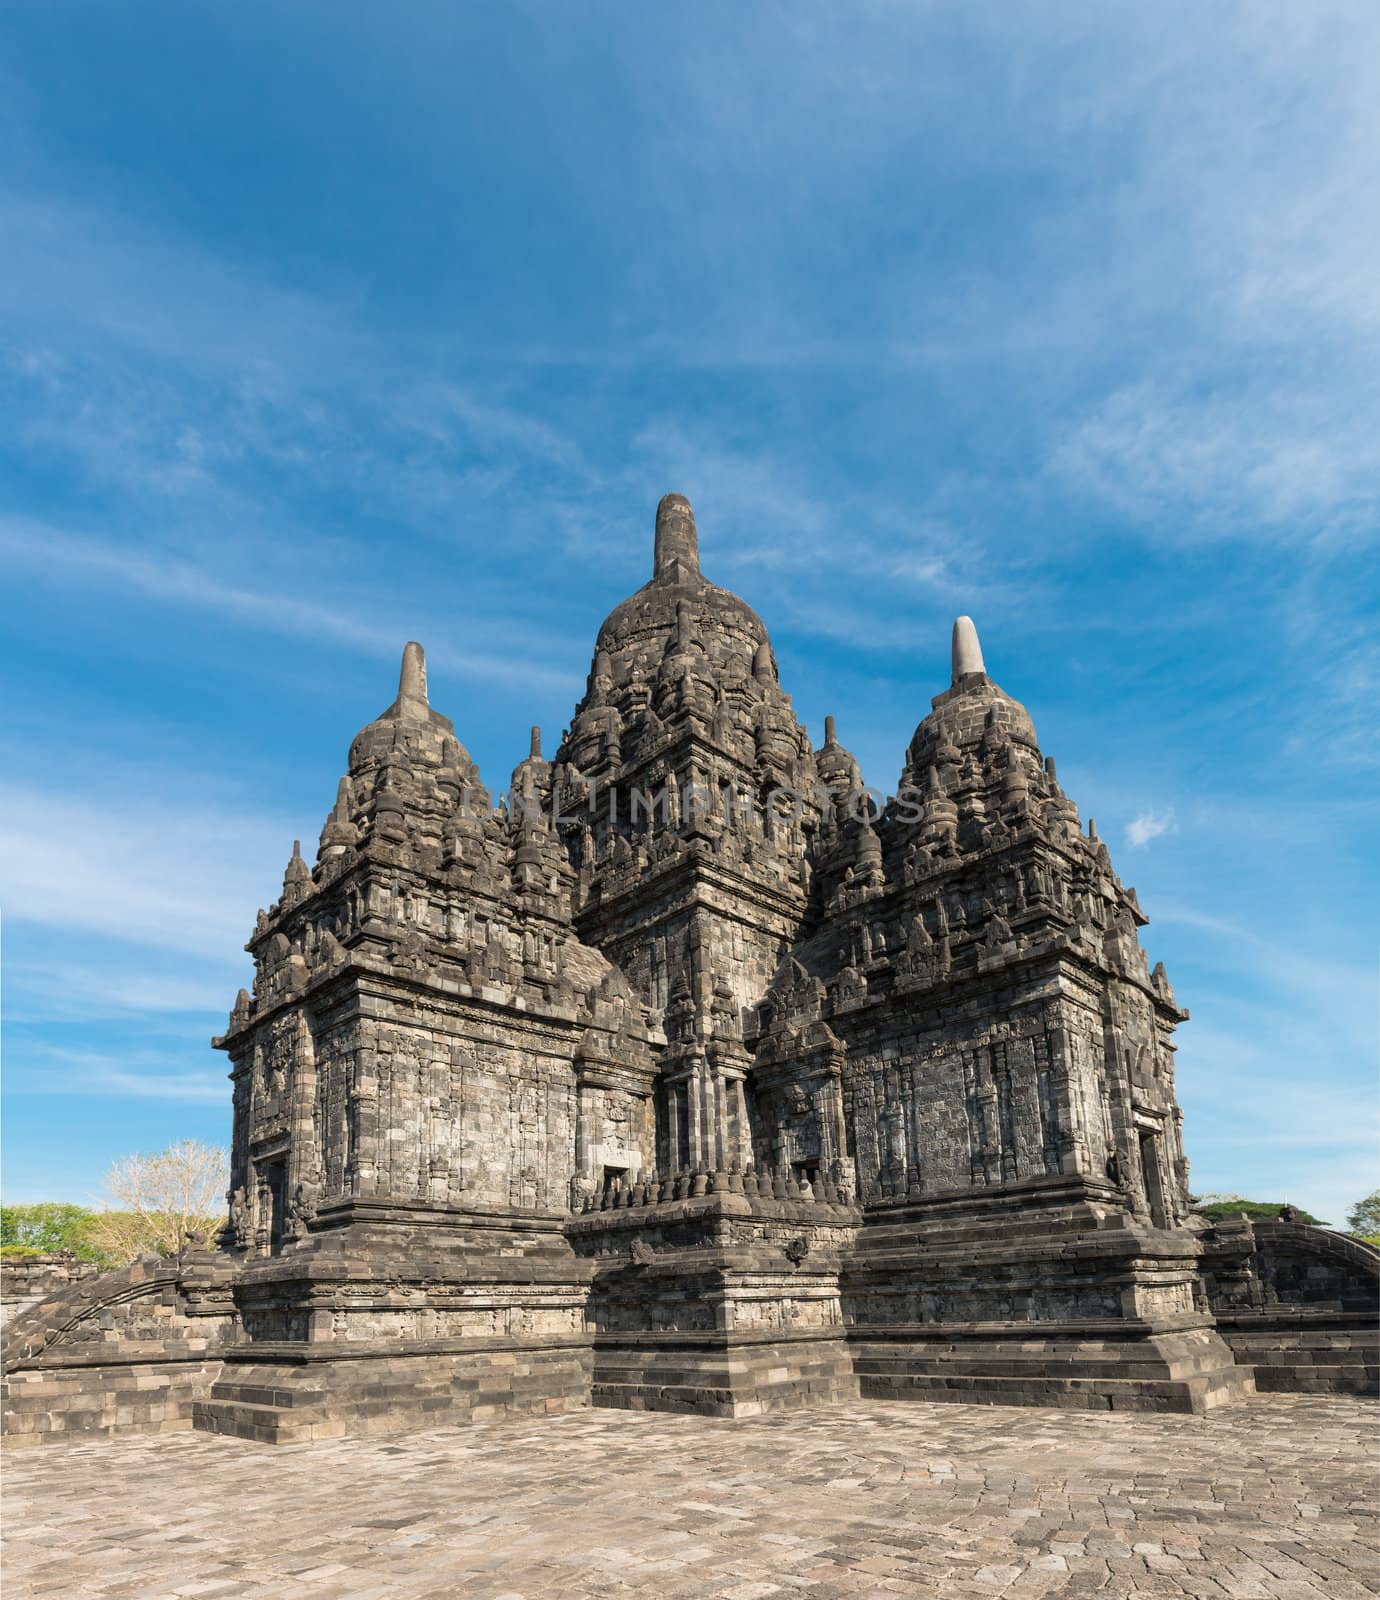 Main temple in Candi Sewu complex (means 1000 temples). It has 253 building structures (8th Century) and it is the second largest Buddhist temple in Java, Indonesia.